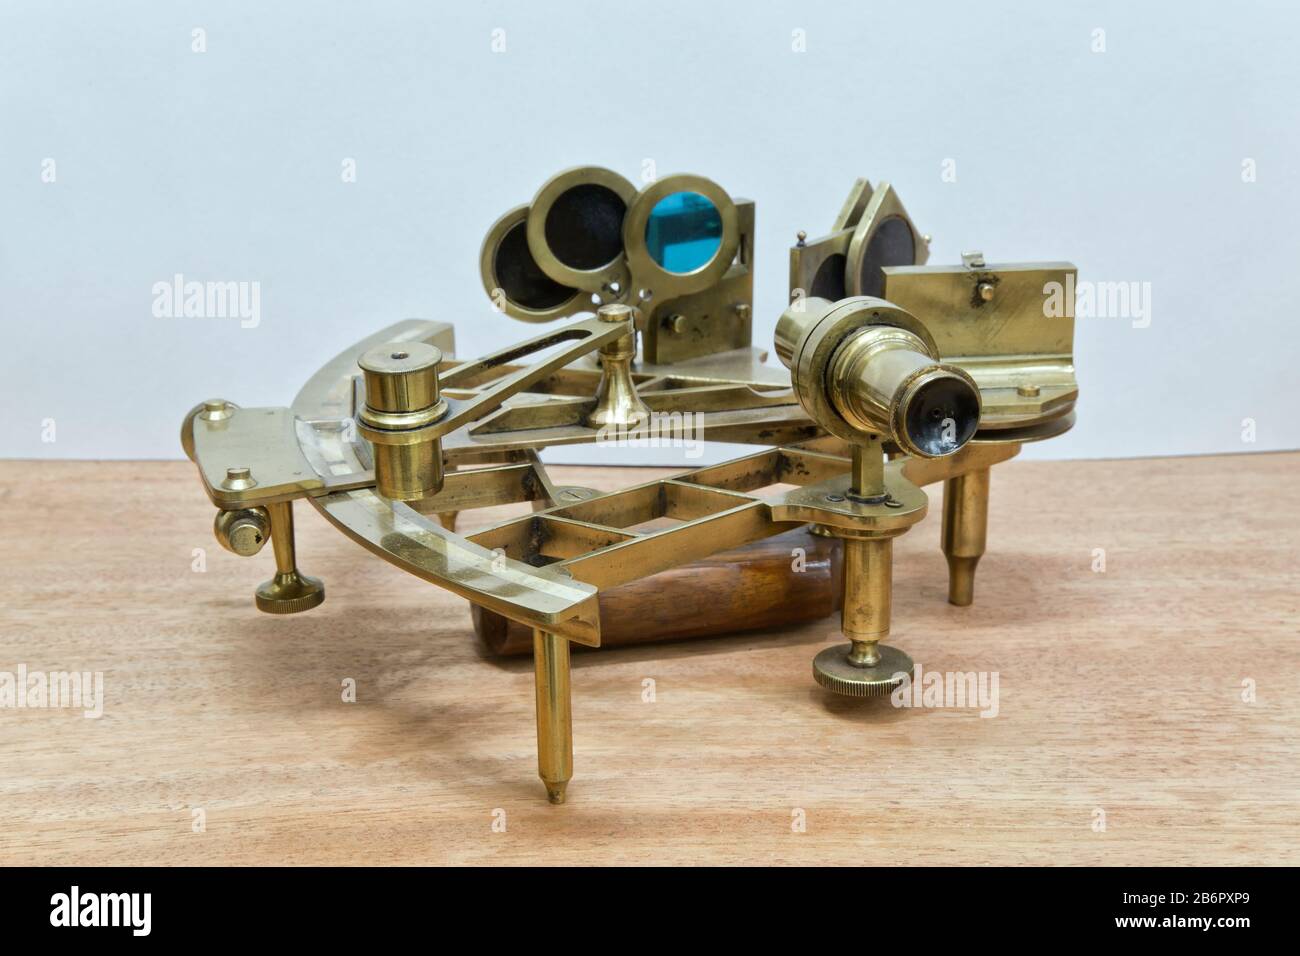 Sextant is the iconic instrument for navigation to find the longitude & latitude on sea & oceans. Stock Photo